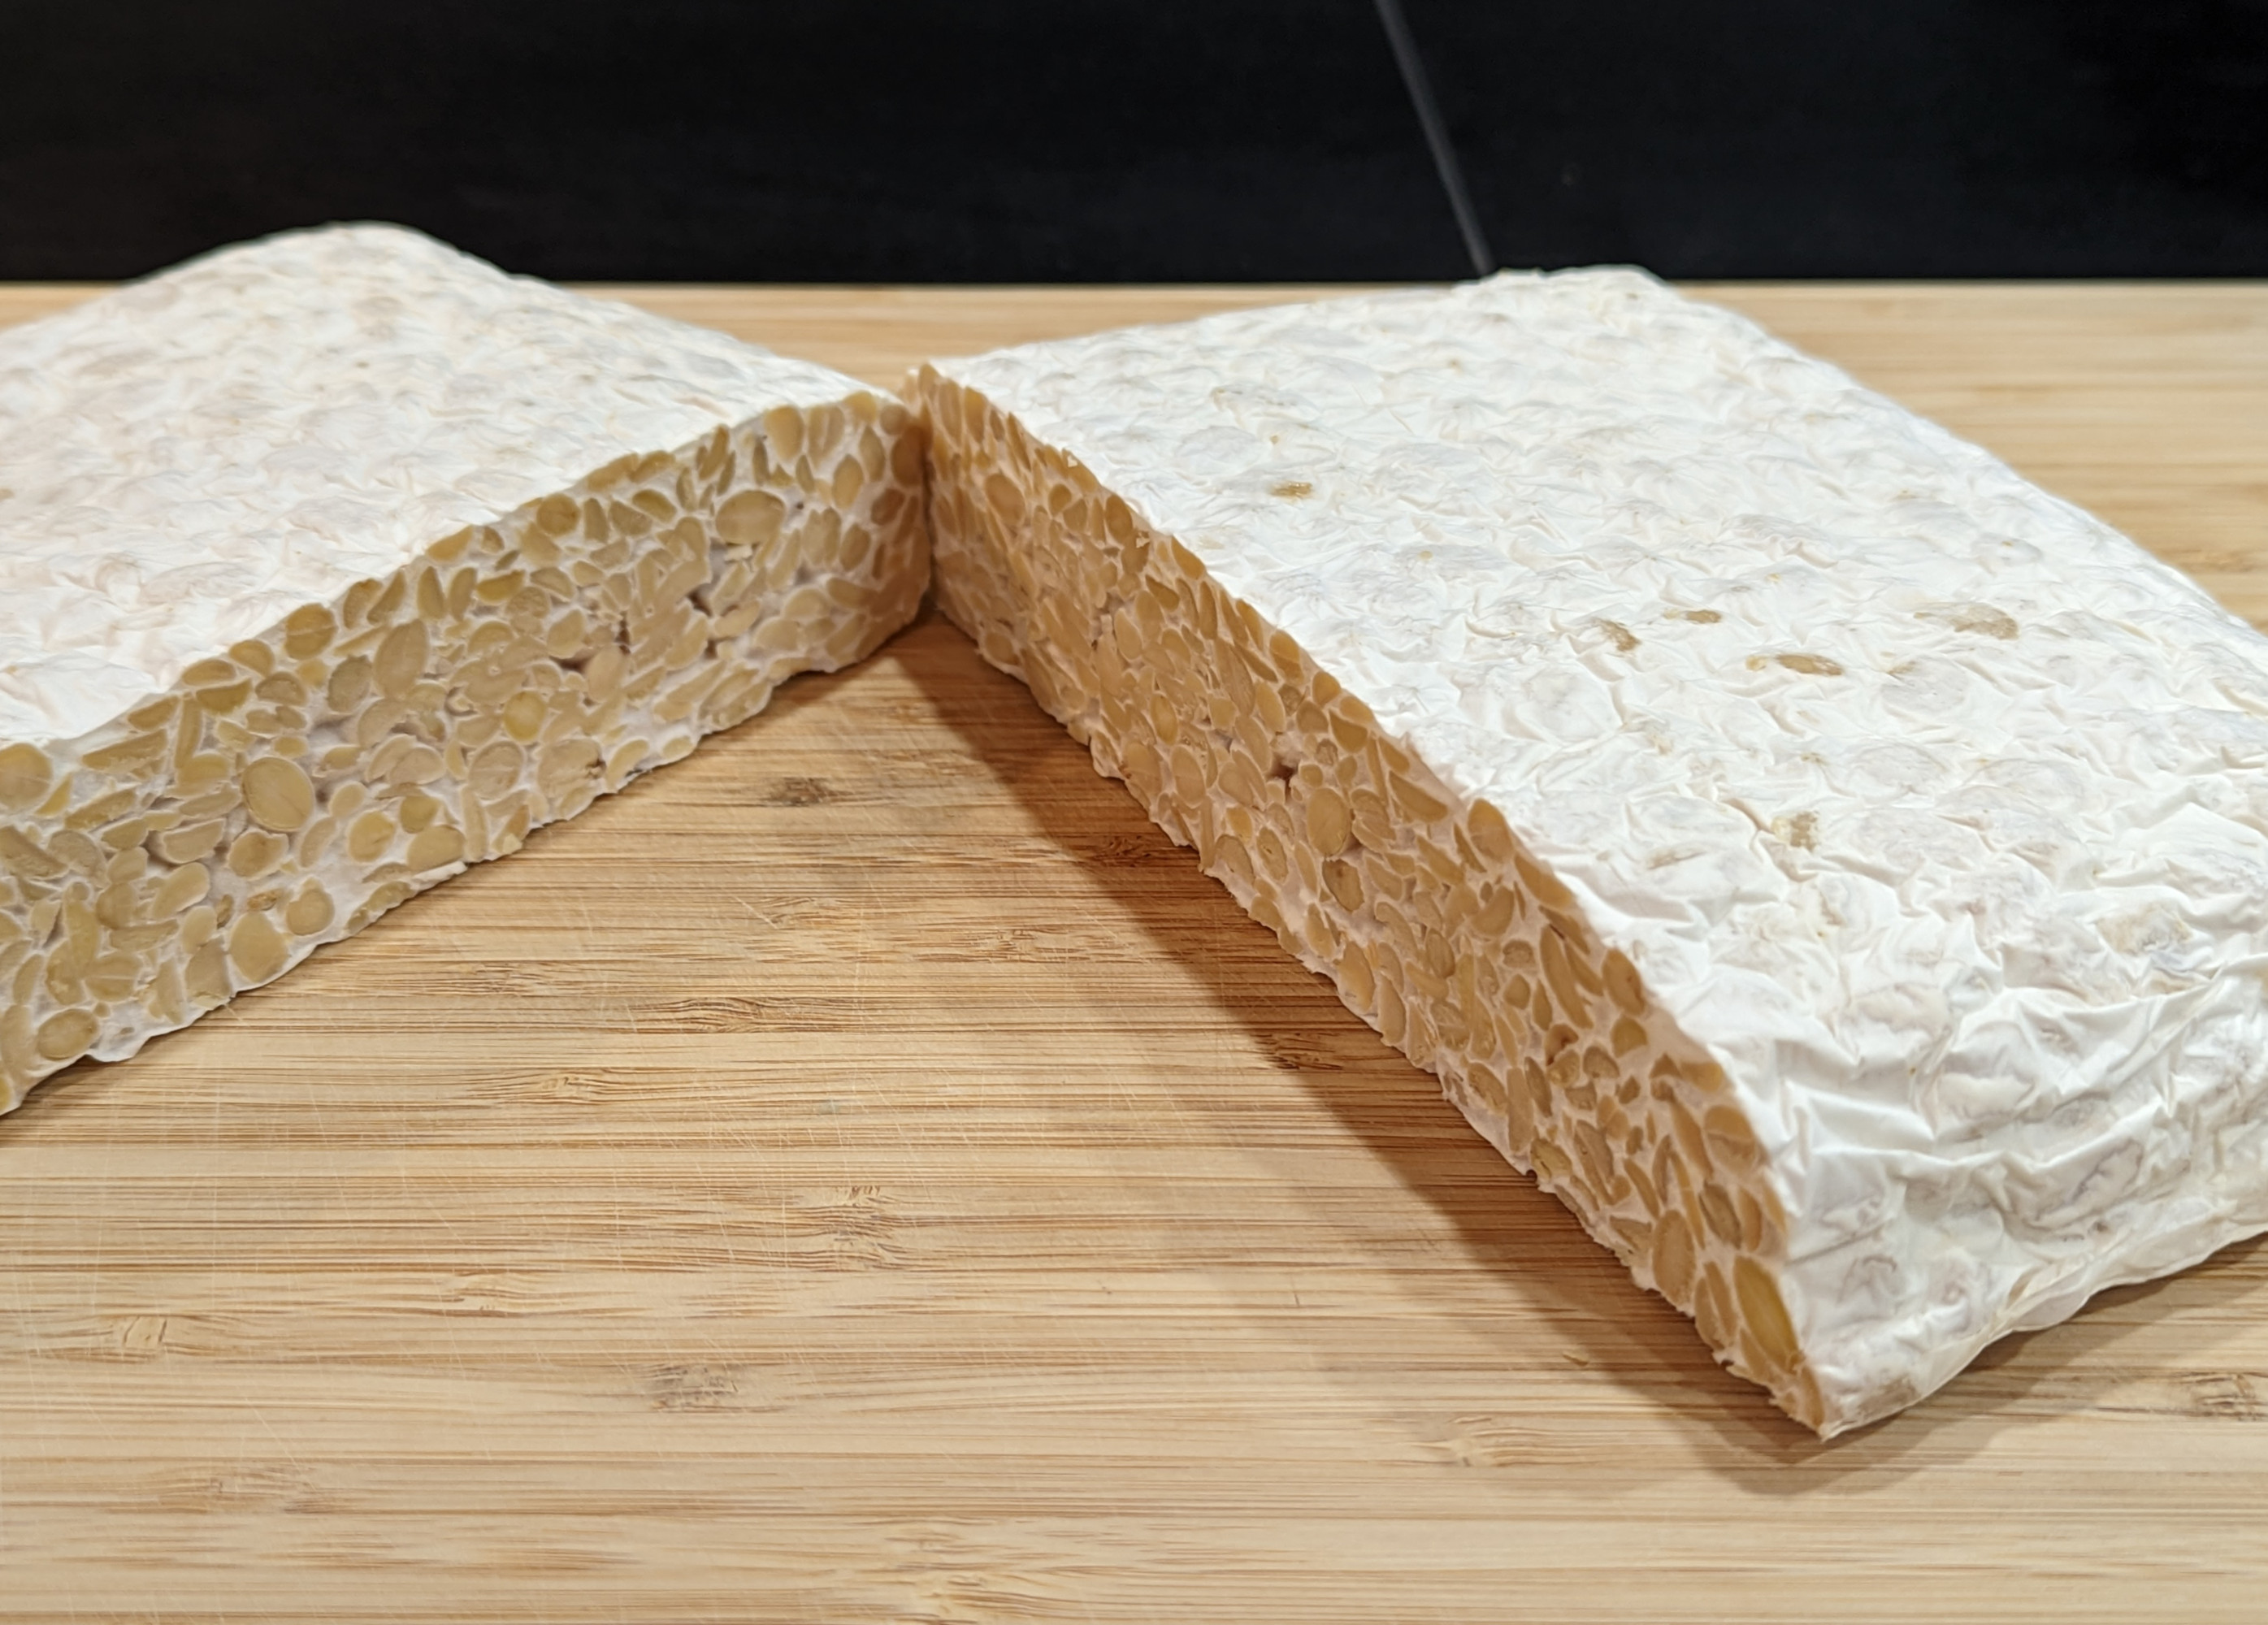 A photo of a white mould-covered cake of soybeans sliced in two, sitting on a wooden cutting board.